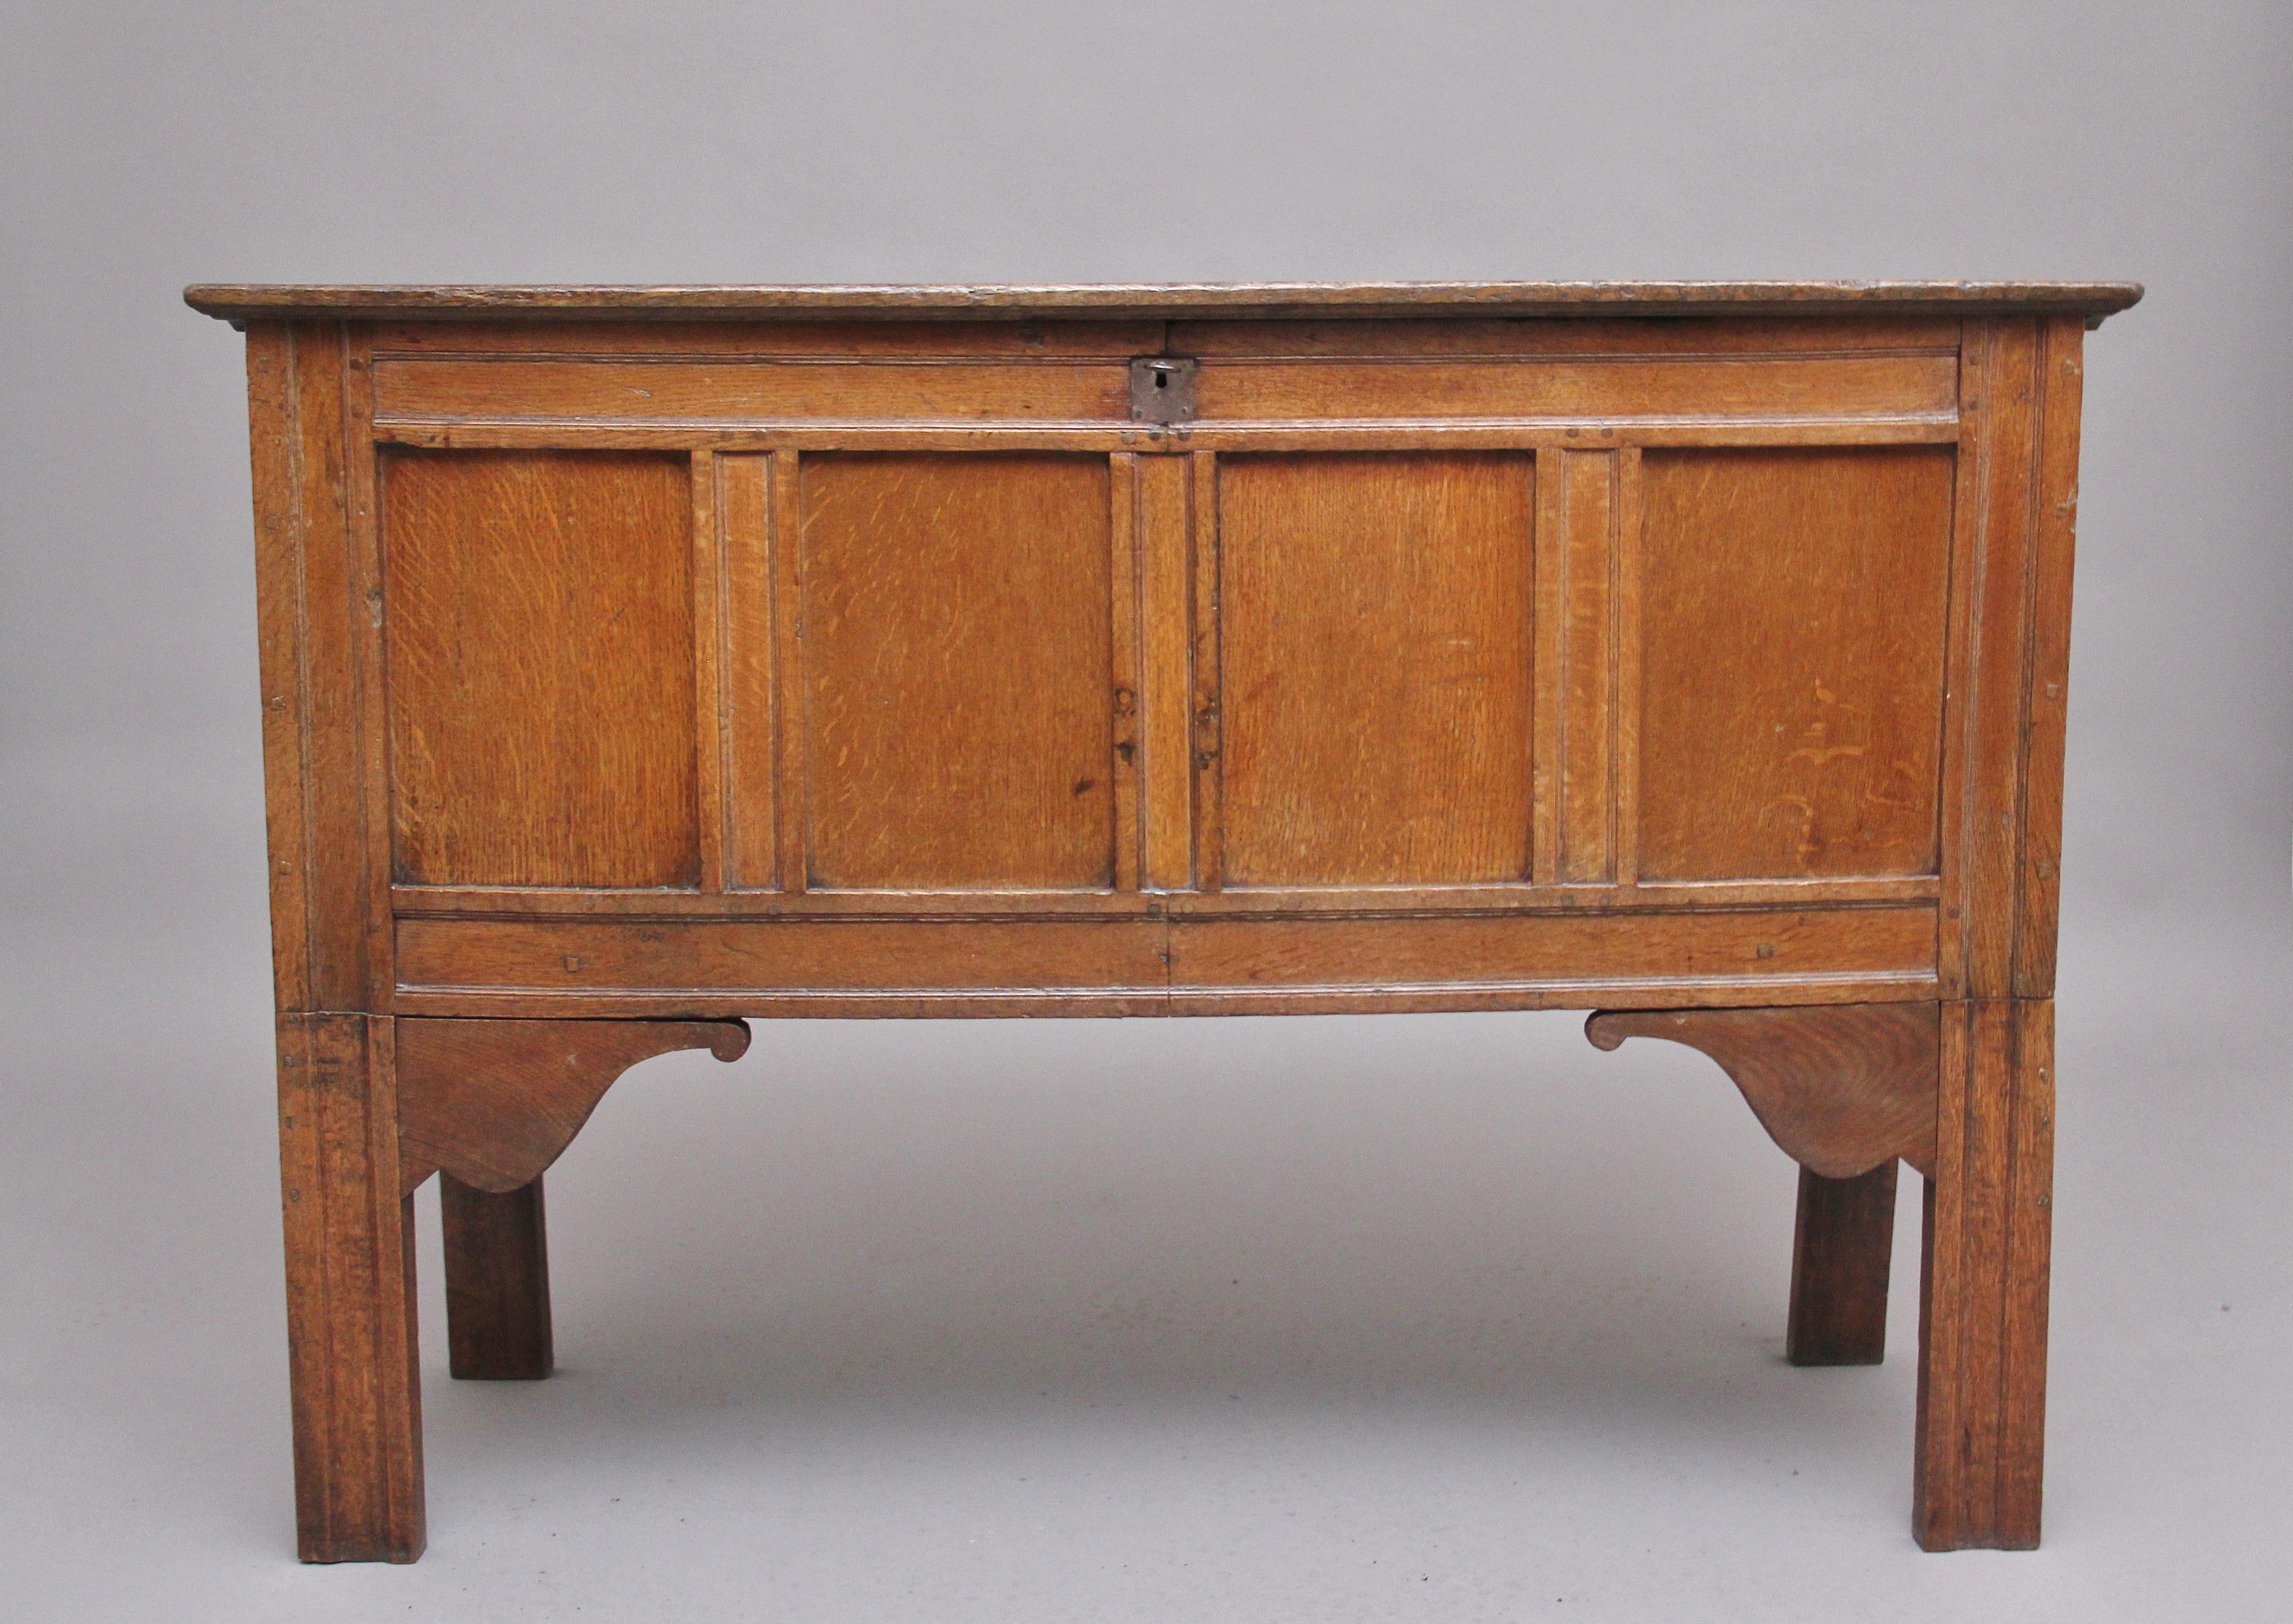 Early 18th century oak coffer with a wonderful figured top that lifts up to reveal a large compartment space, having a four panelled front with moulded edge, supported on moulded square legs with front shaped corner brackets. Circa 1740.